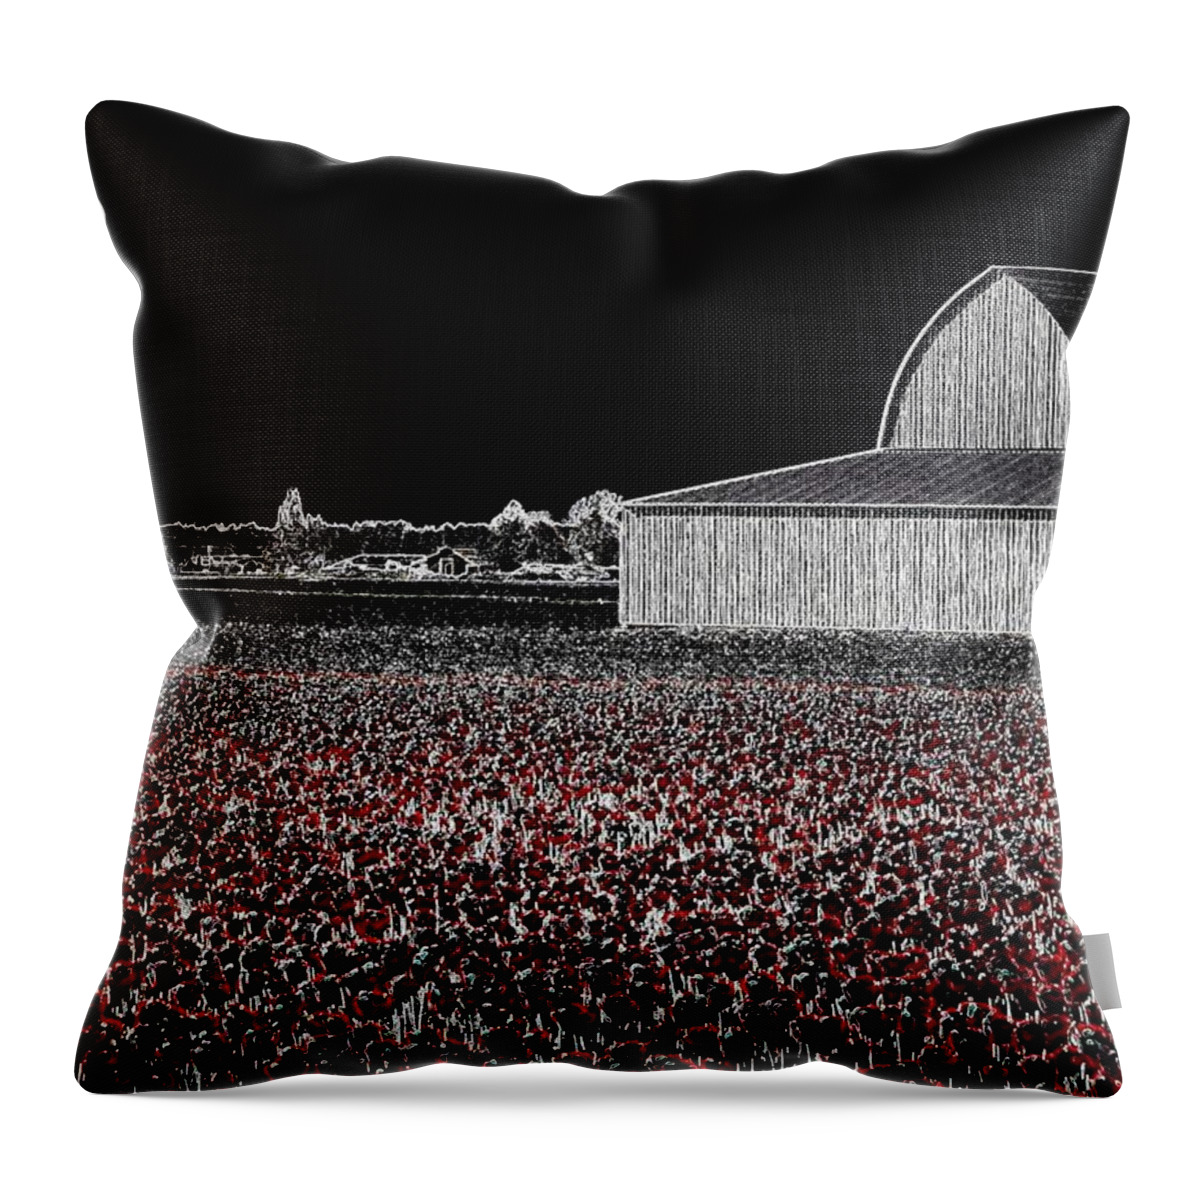 Tulips Throw Pillow featuring the digital art Moonlit Tulips by Will Borden